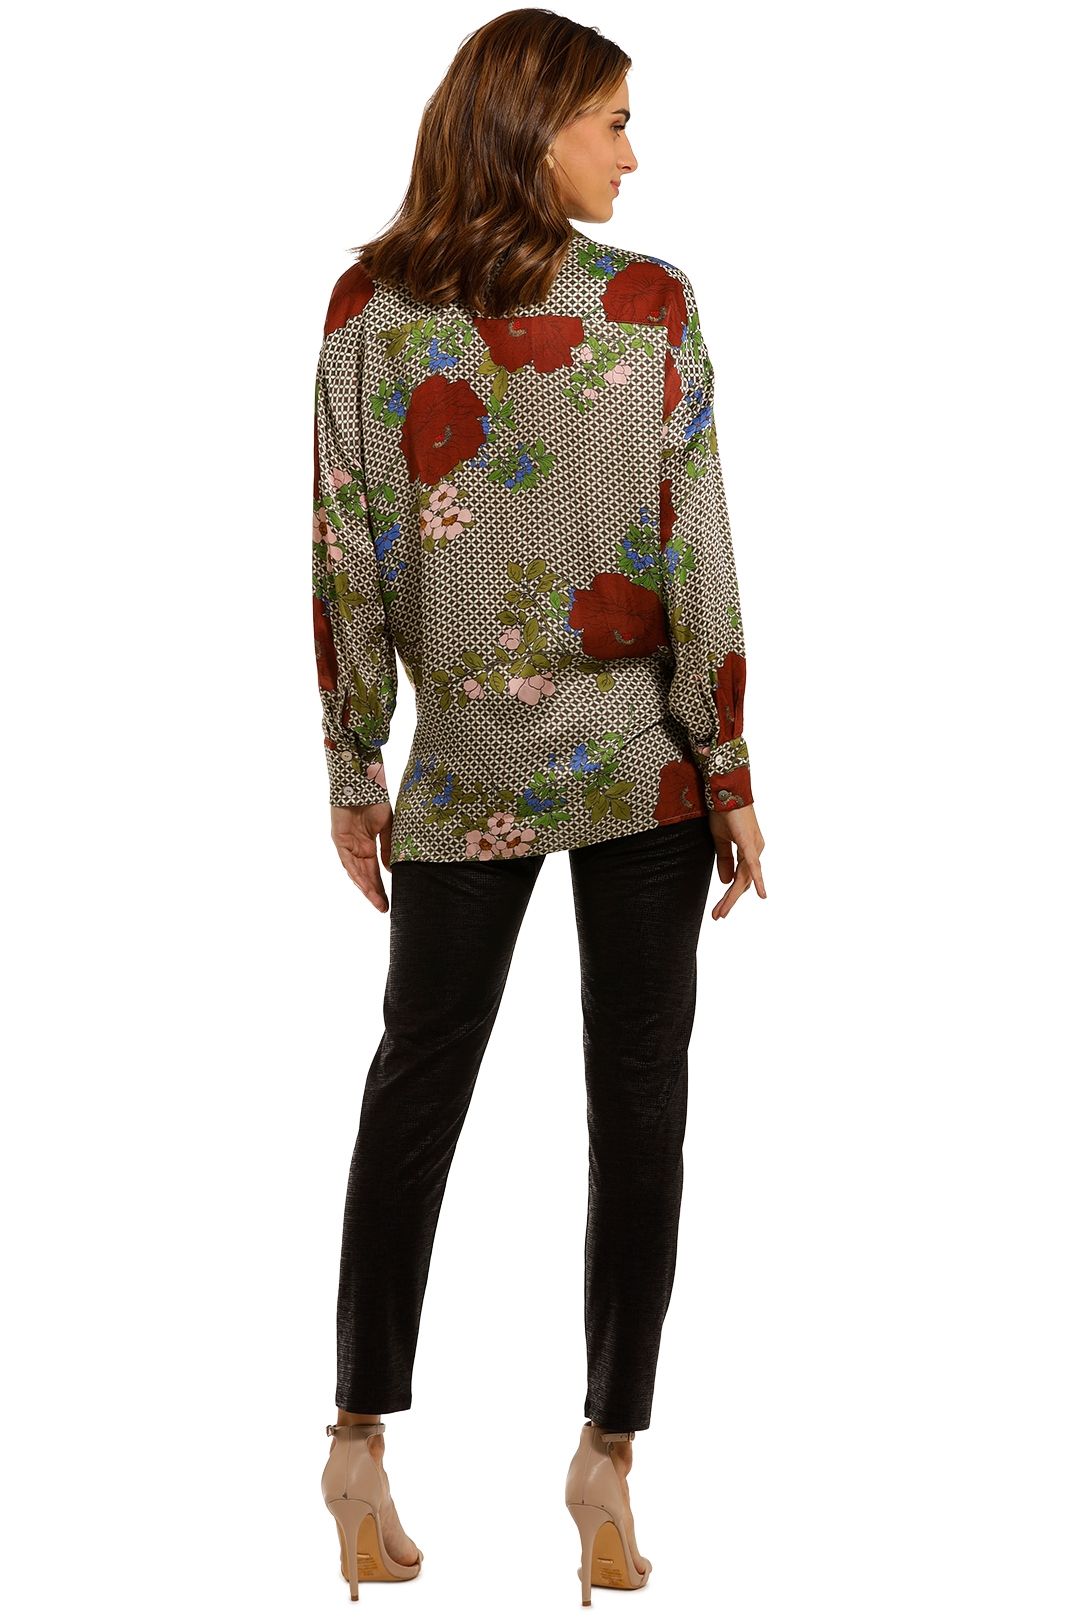 Curate by Trelise Cooper Ladies Blouse floral